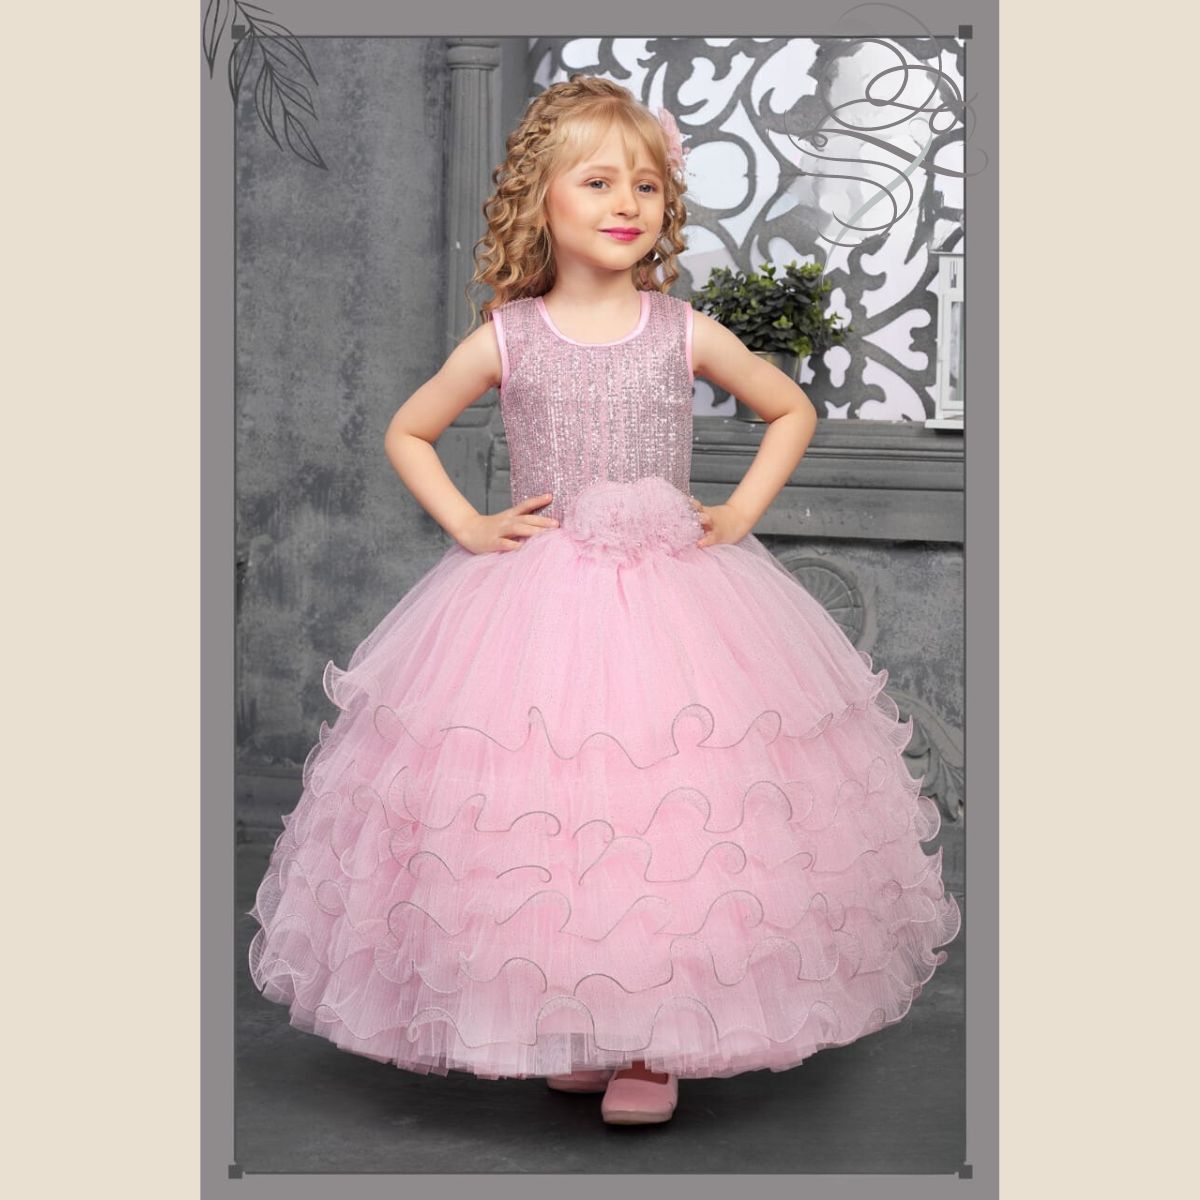 Shop Child Ball Gown Online - Etsy